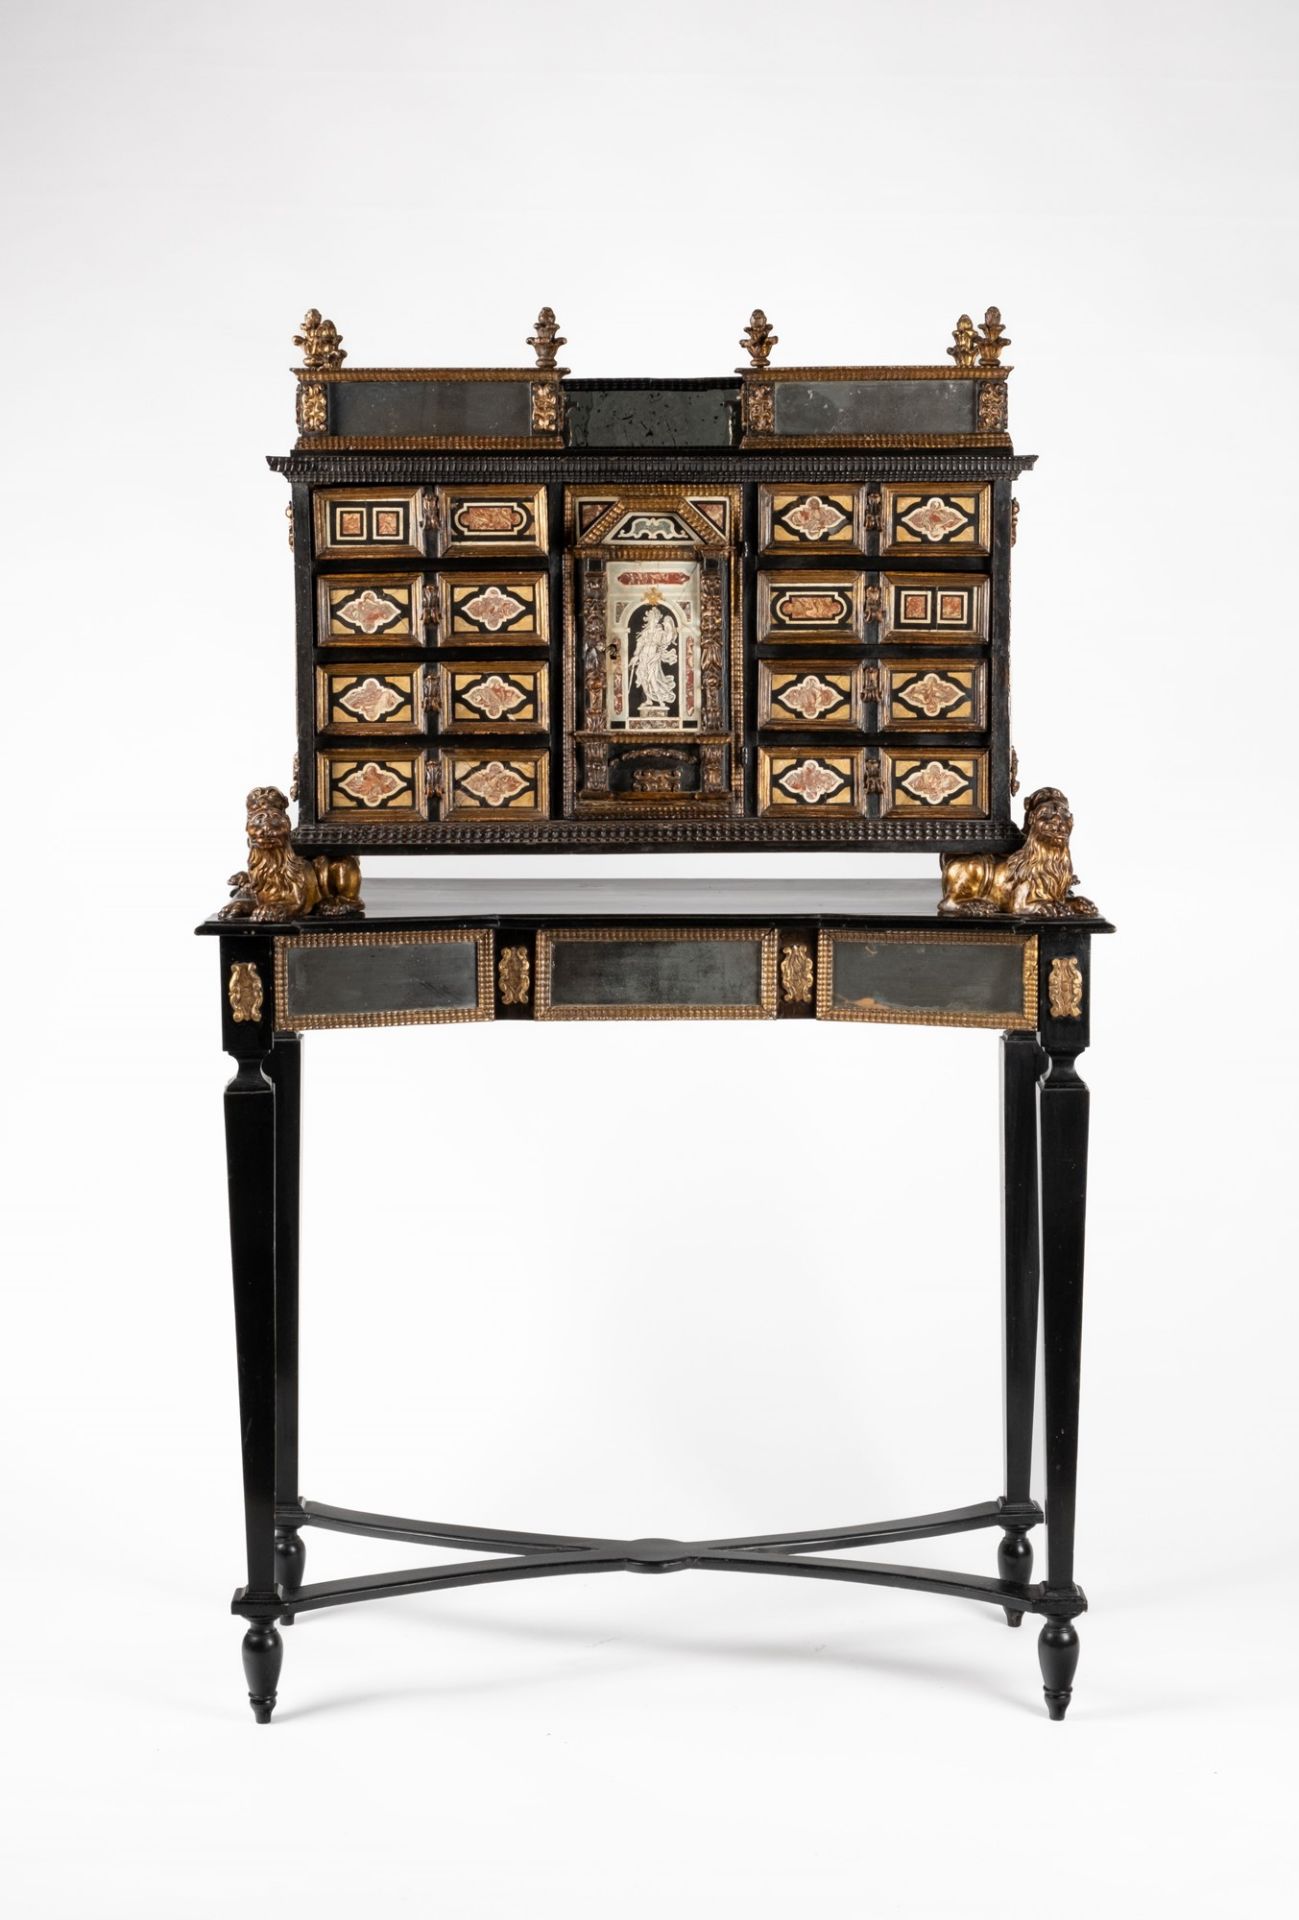 Cabinet of architectural form. Tuscany, 17th century